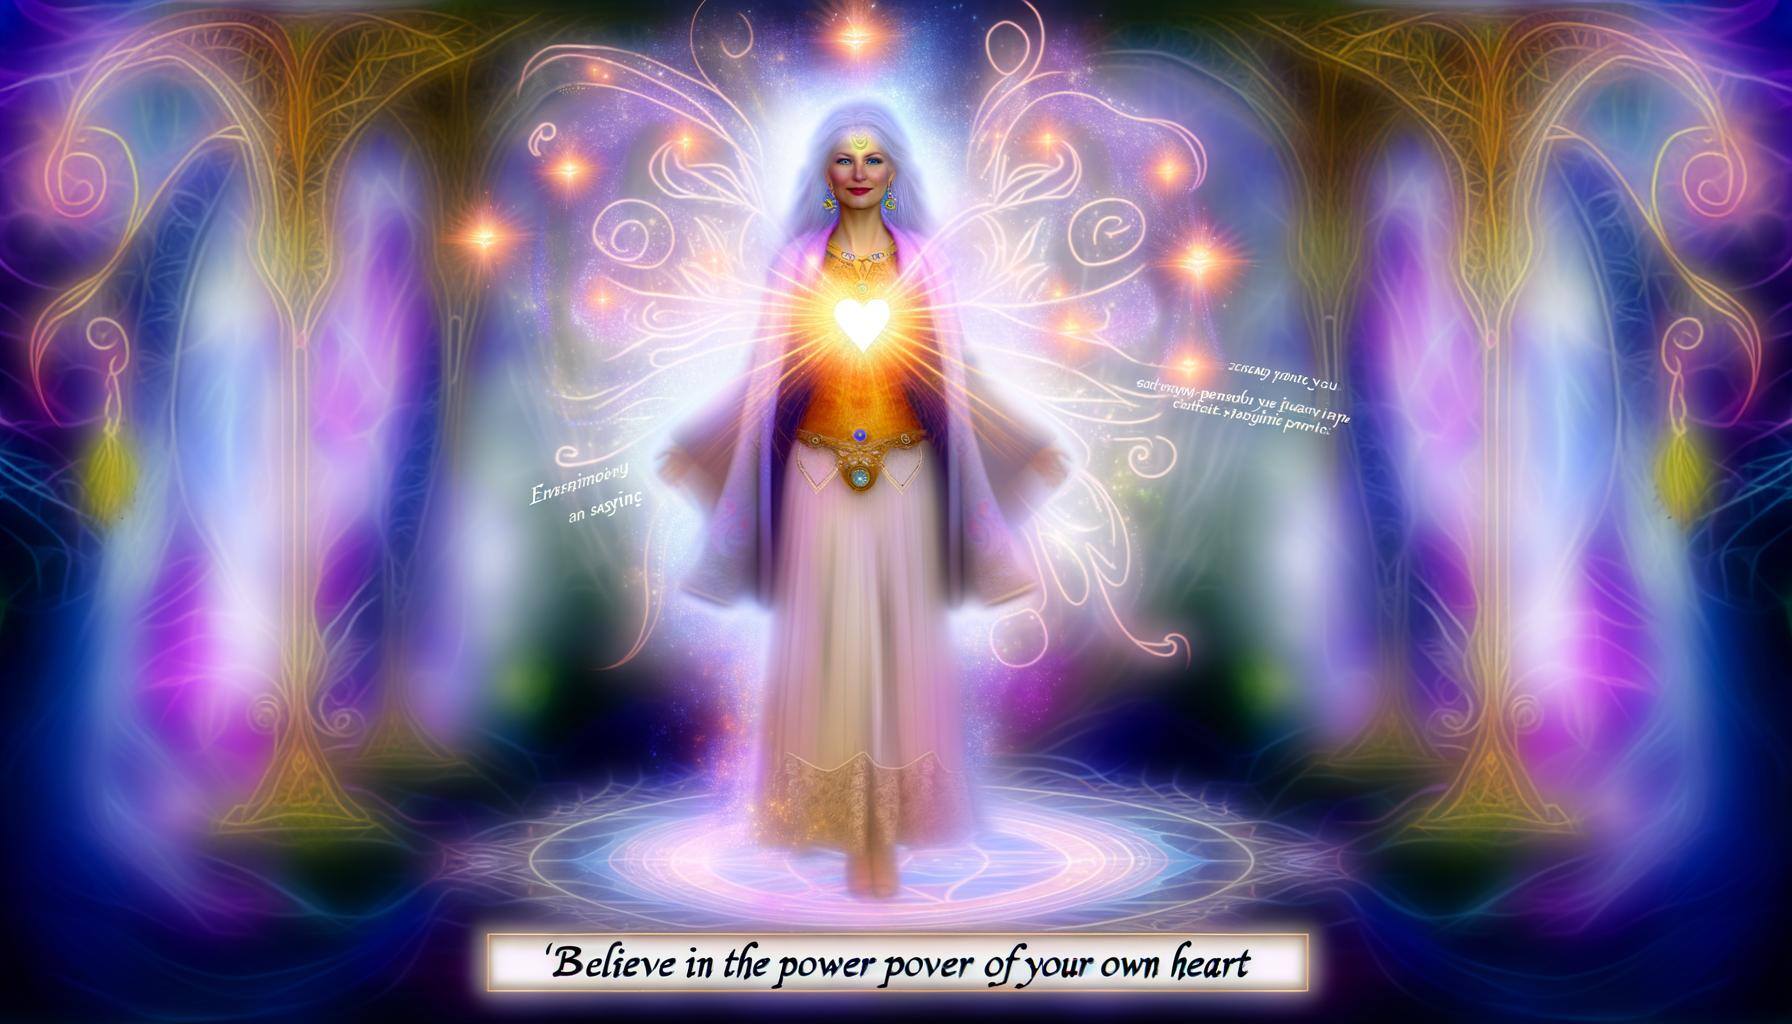 unleash your inner enchantress, hone your selflove, and believe in the power of your own heart You are the most powerful spellcaster you know